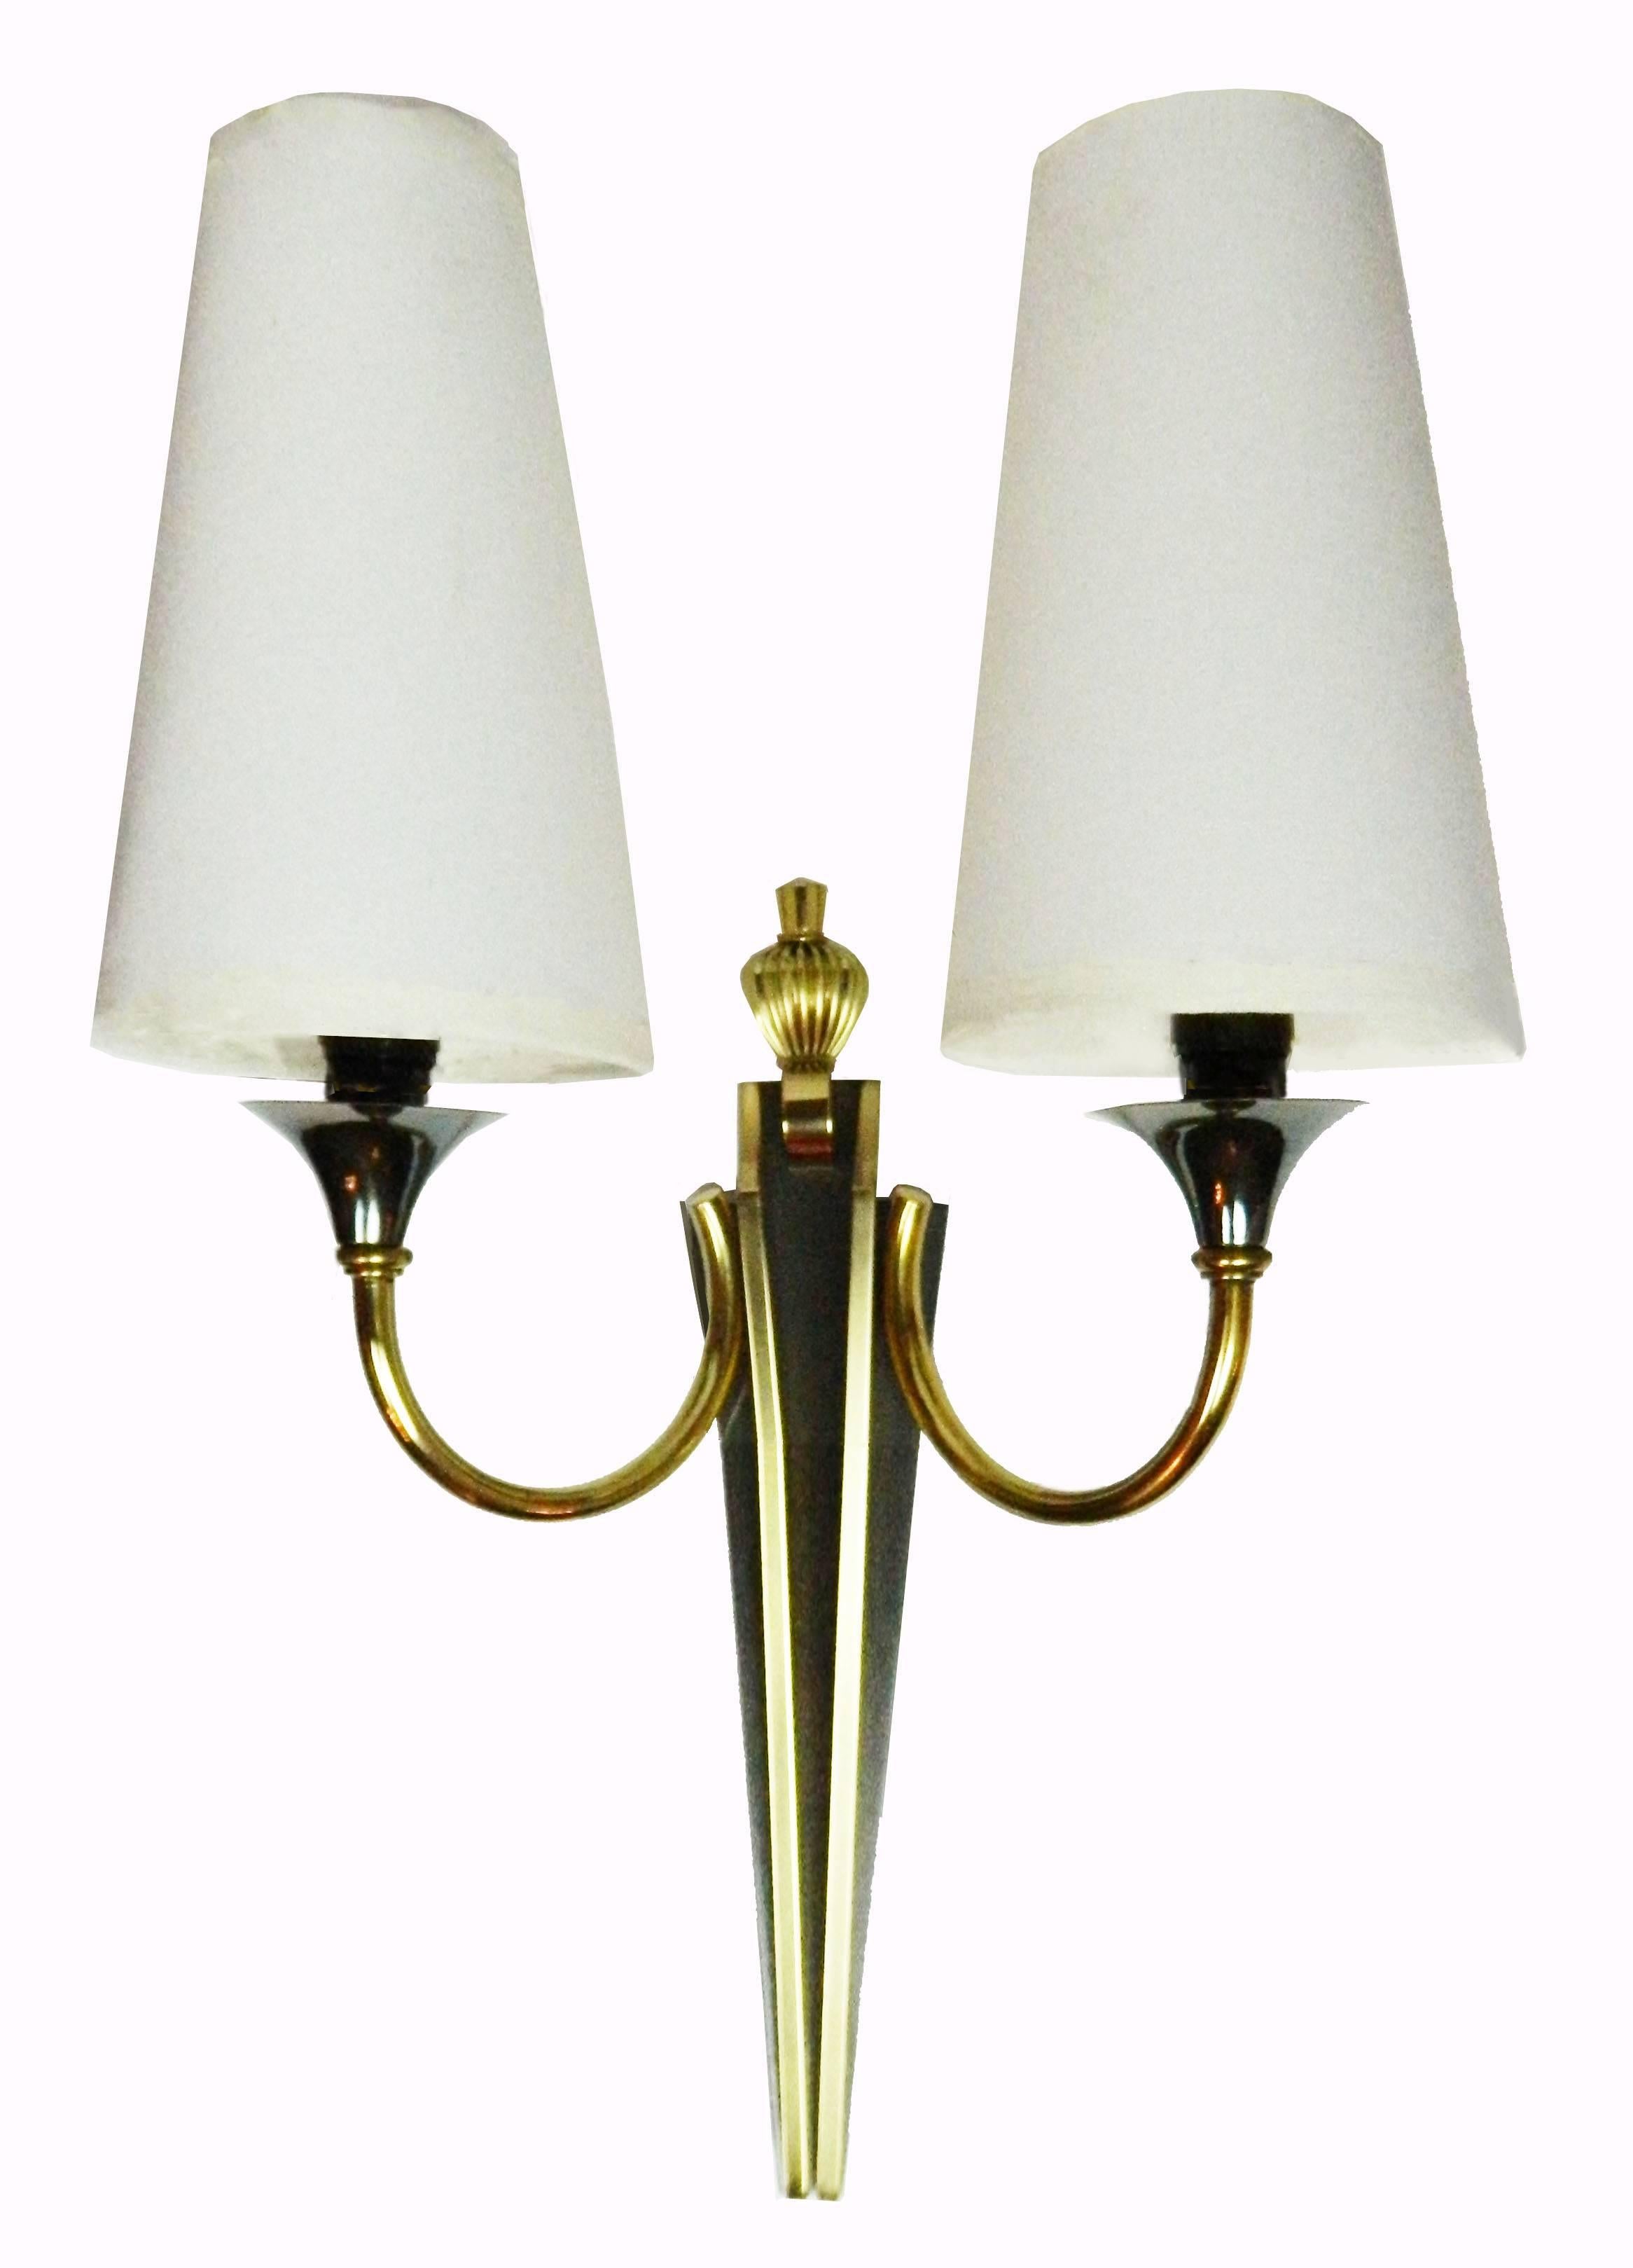 Maison Jansen Gold and Black Pair of Sconces In Excellent Condition For Sale In Miami, FL